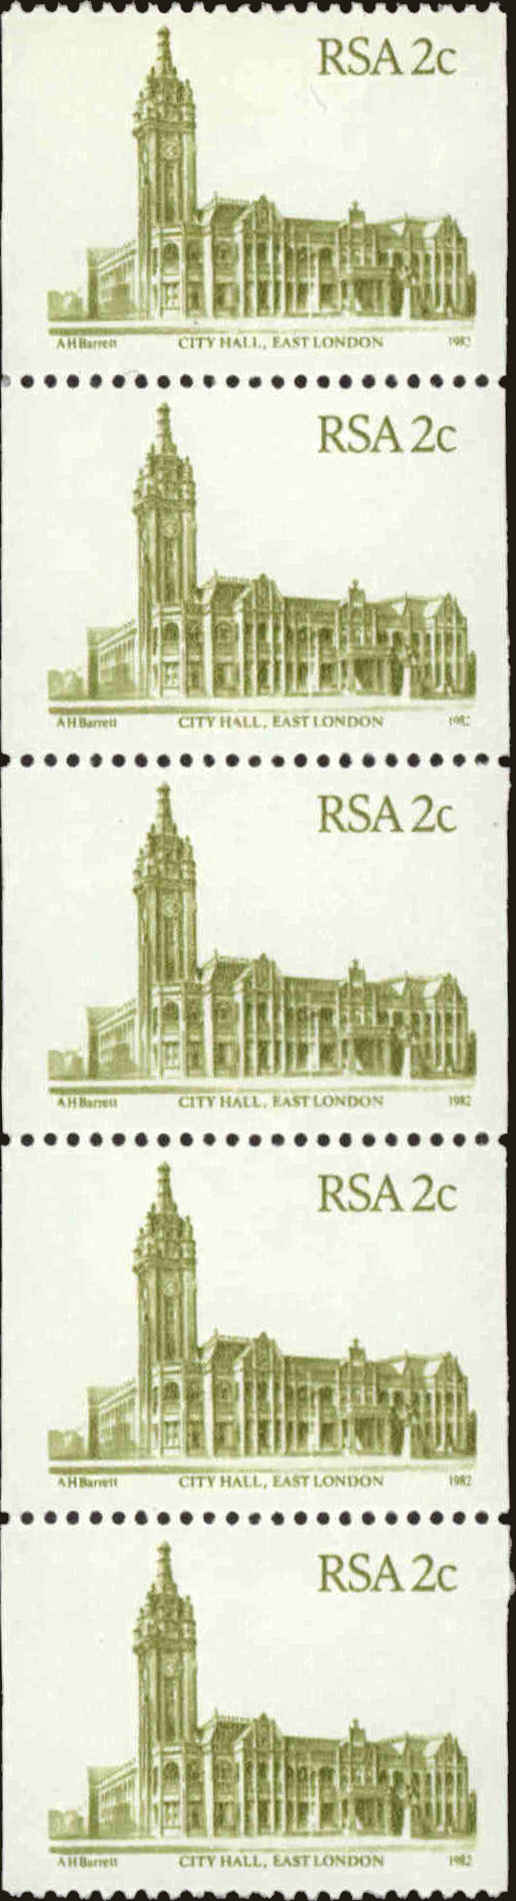 Front view of South Africa 603 collectors stamp